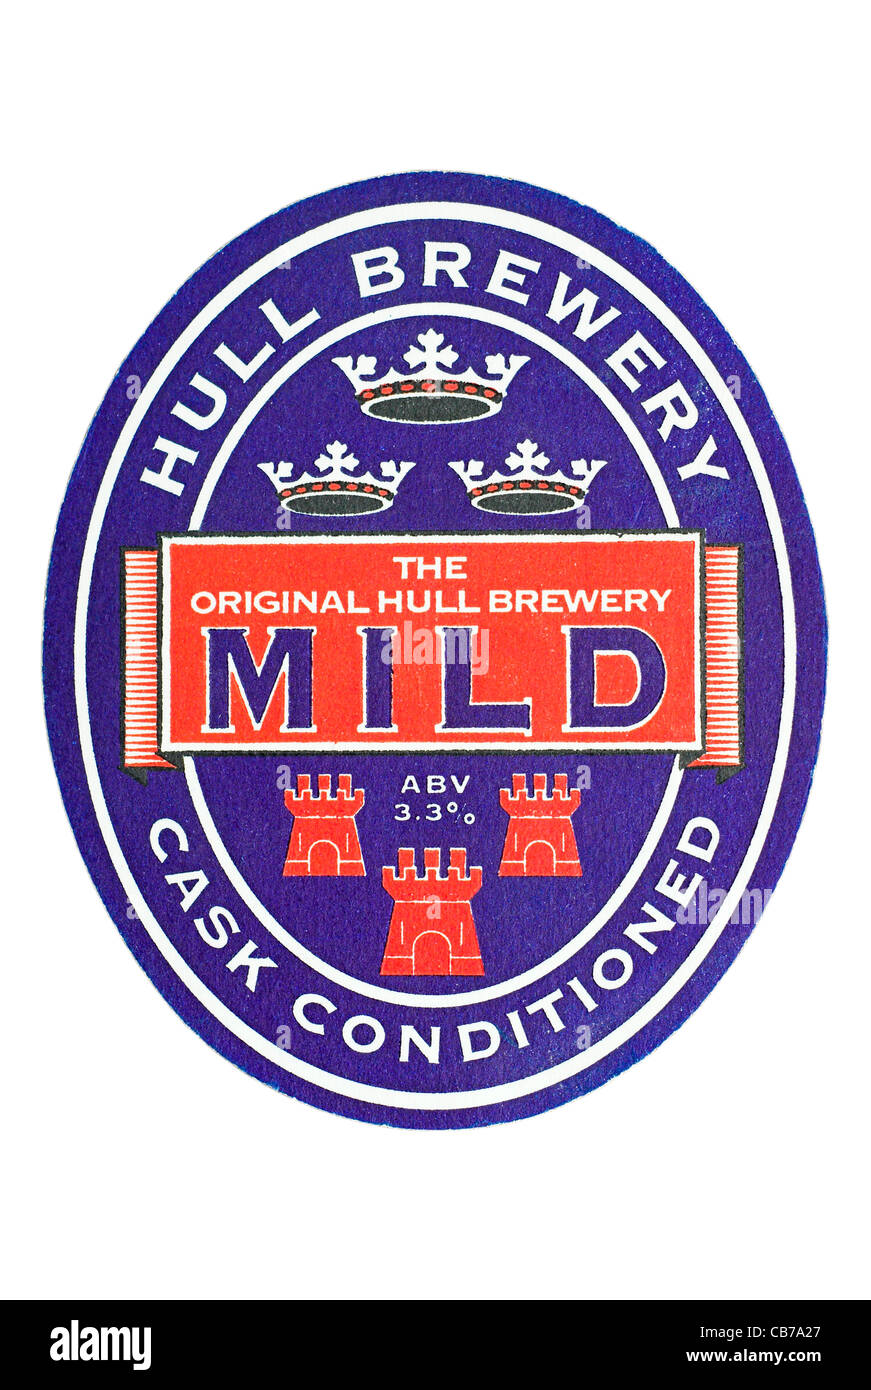 Beer Mat / drip mat - Hull Brewery of Yorkshire, England featuring an advert for their Cask Mild. Stock Photo